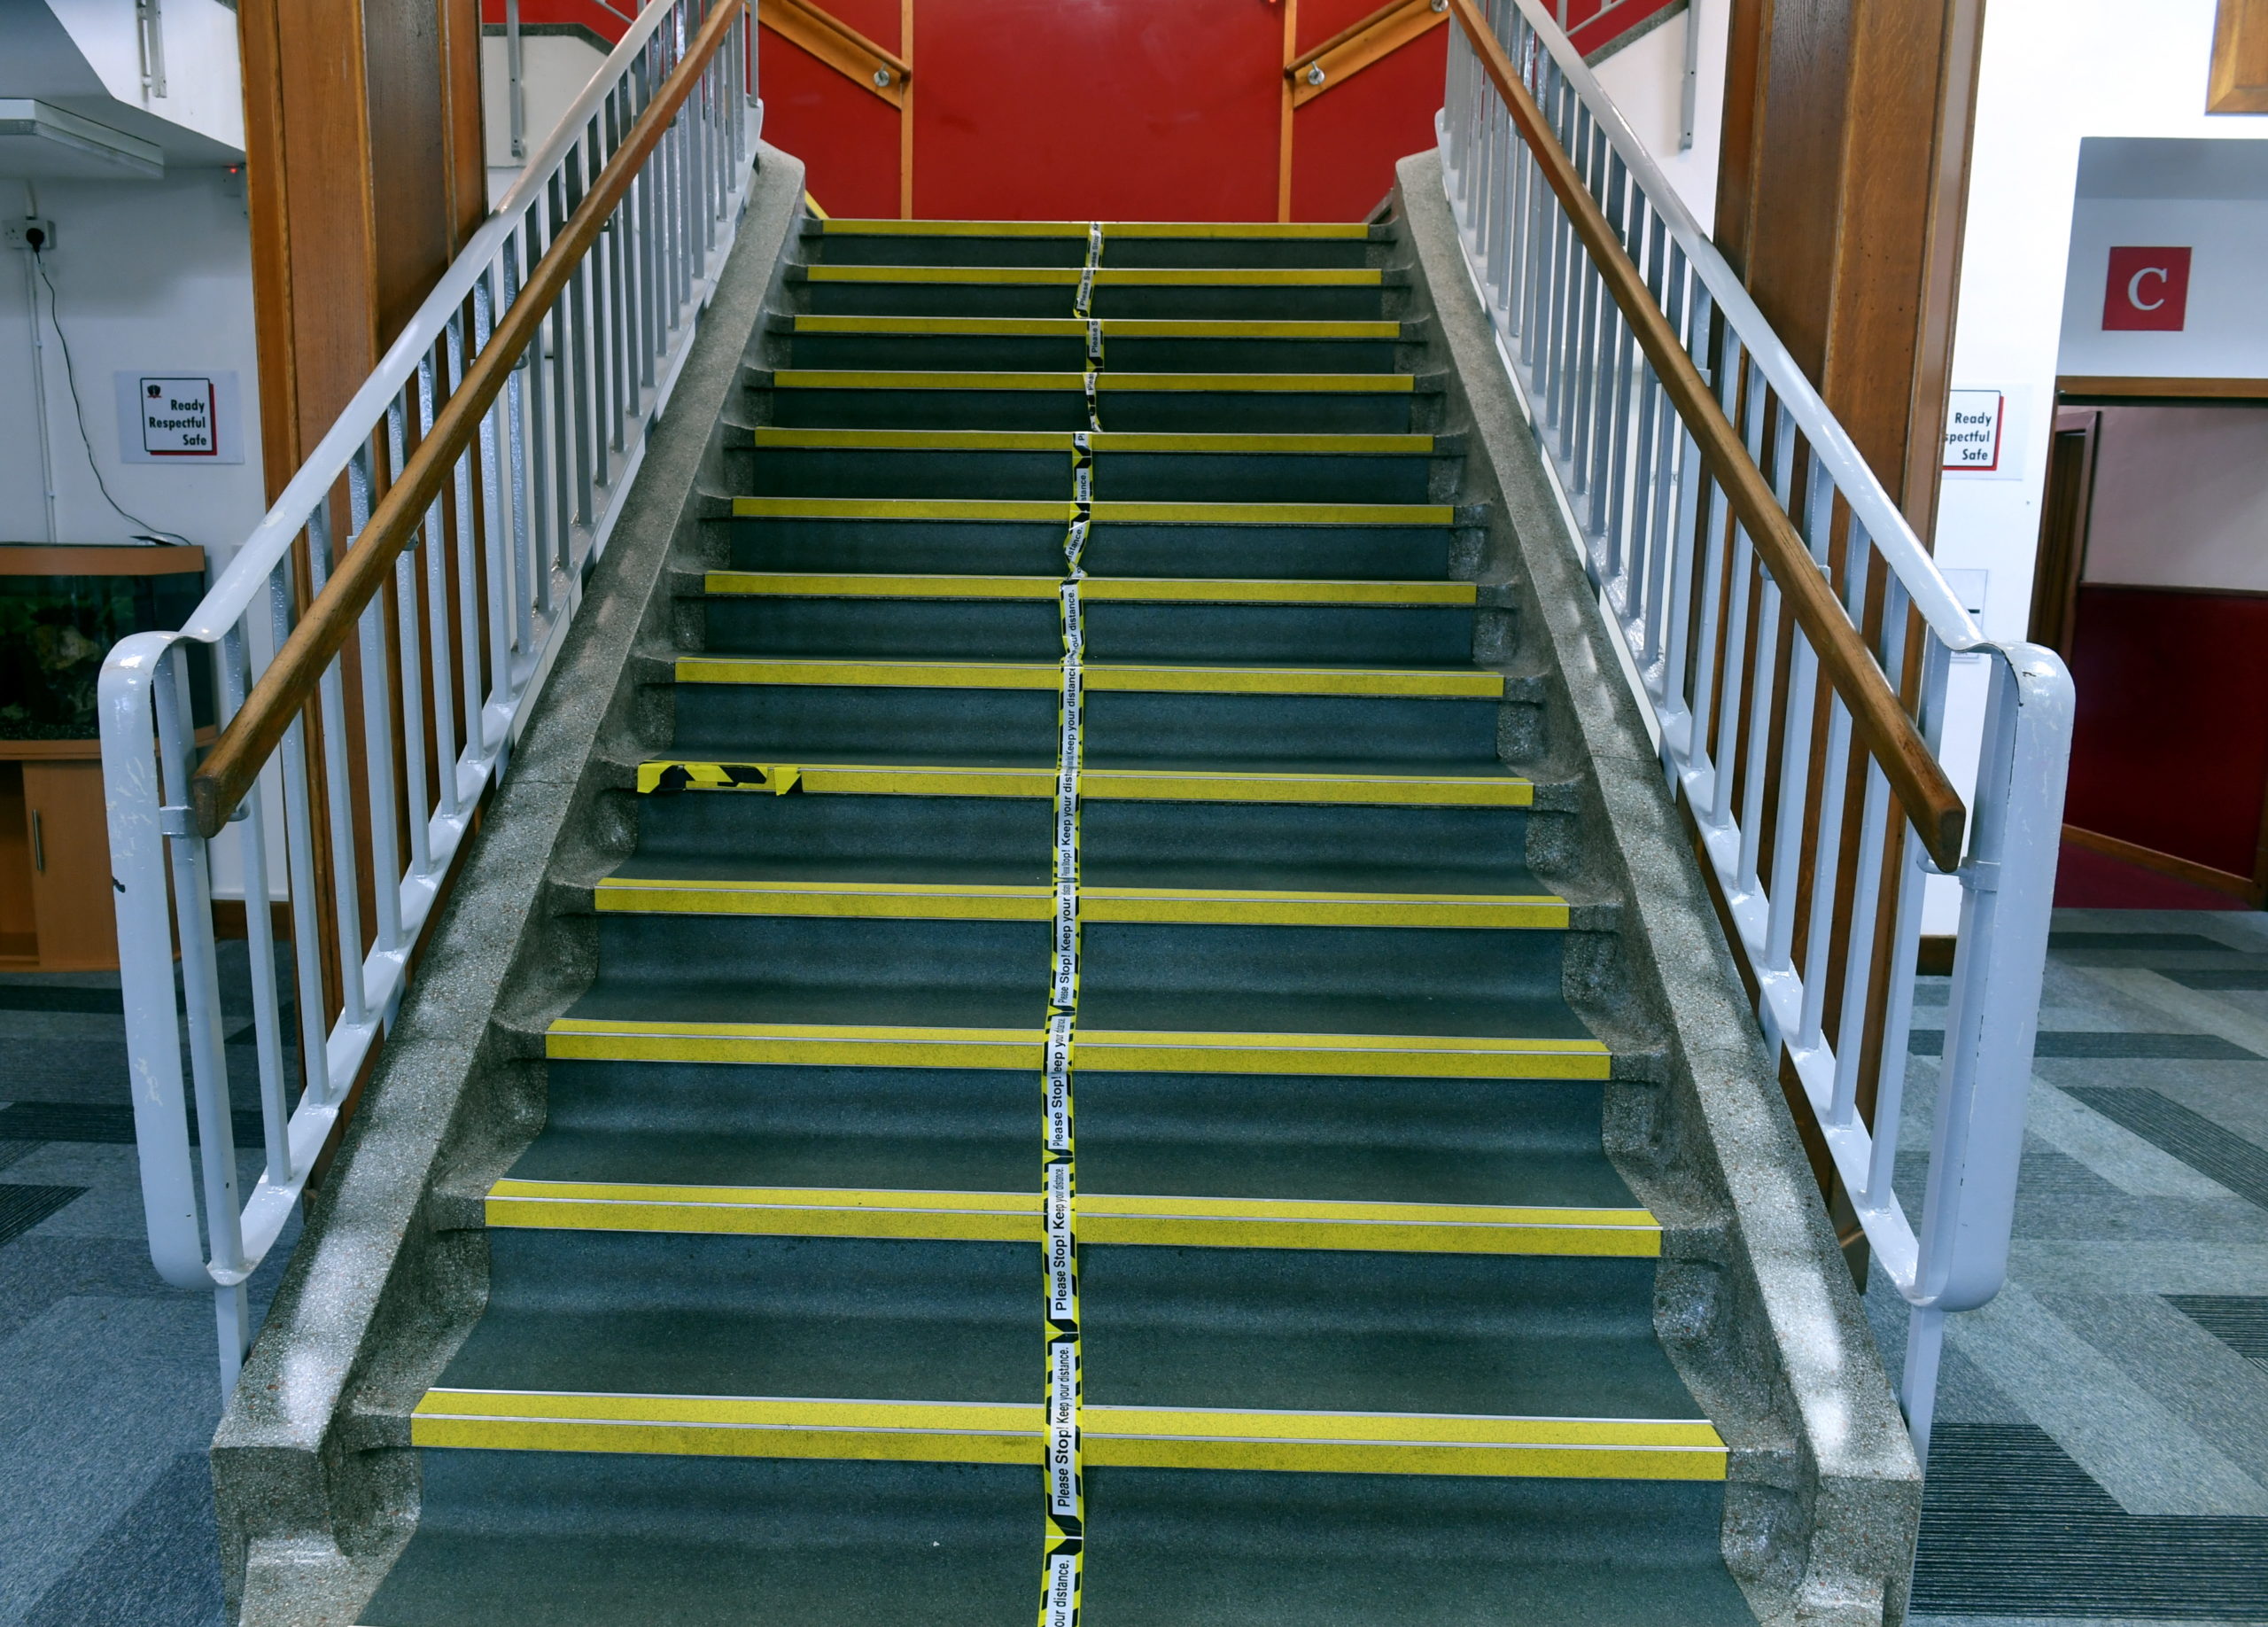 A stairwell at Fraserburgh Academy
Pic by....Chris Sumner
Taken...............11/08/20.